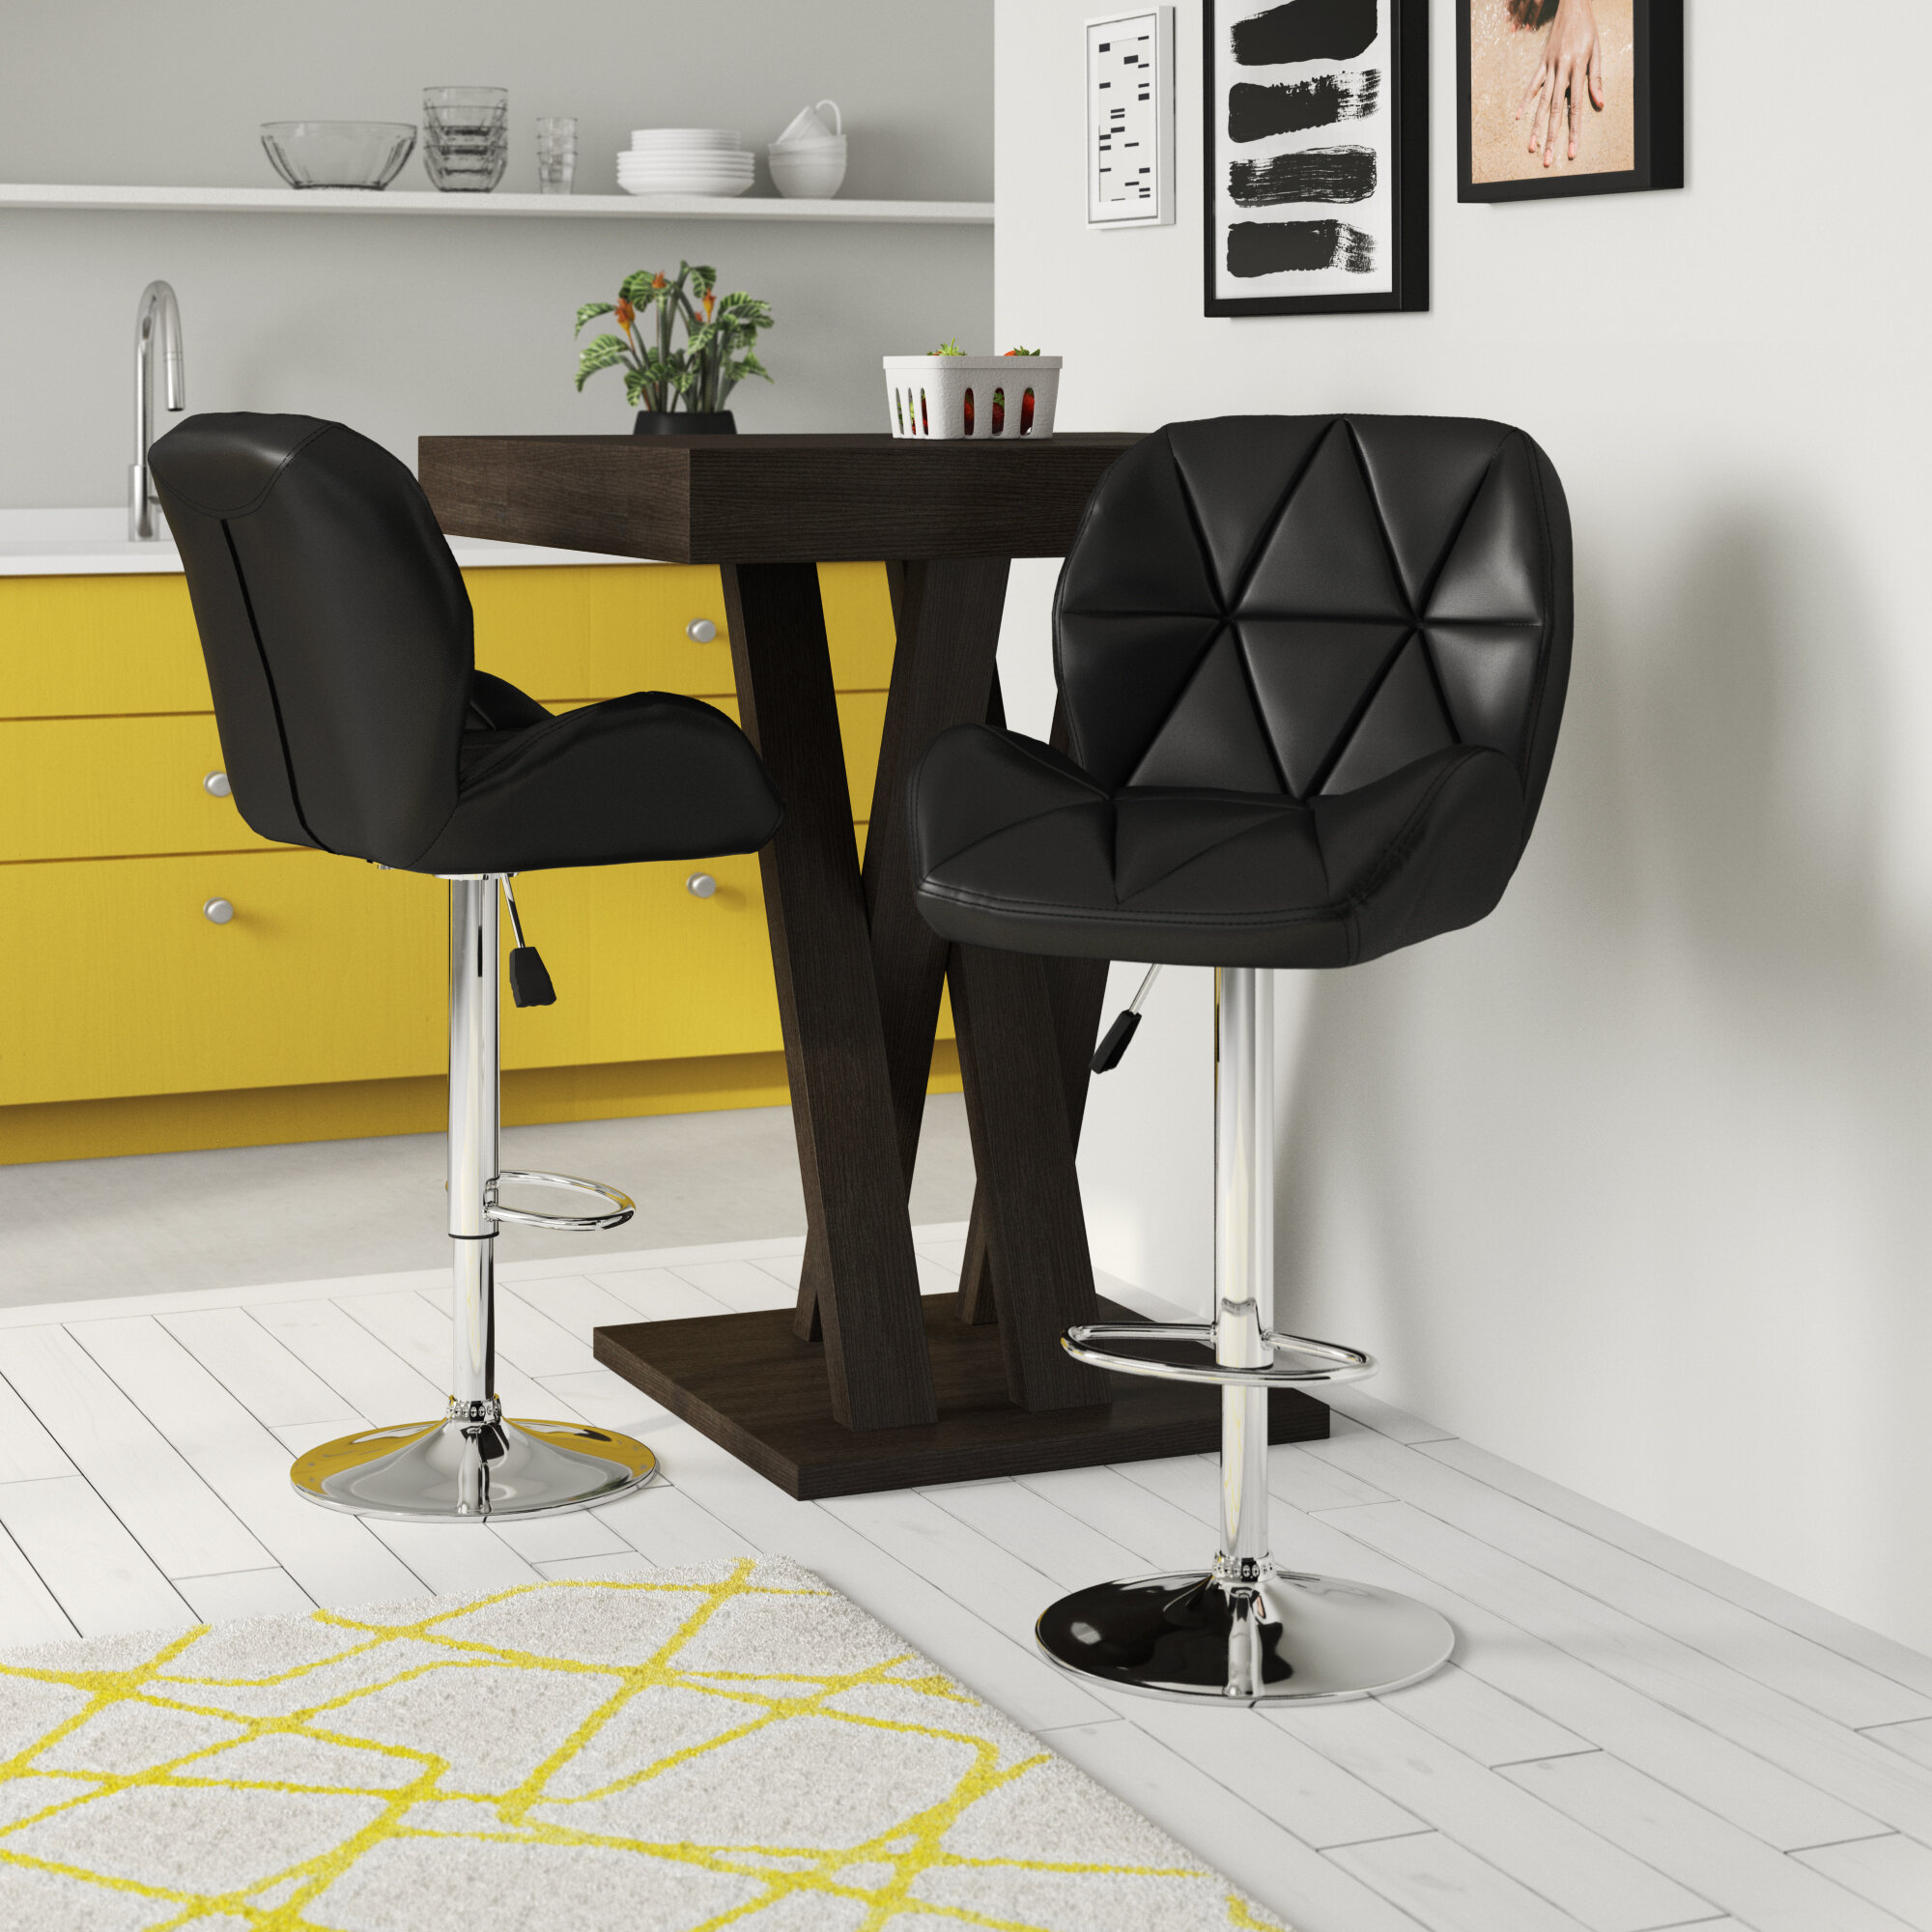 New Elegant Metal Tromso Bar Stool Perfect for High Tables and Breakfast Bars. 